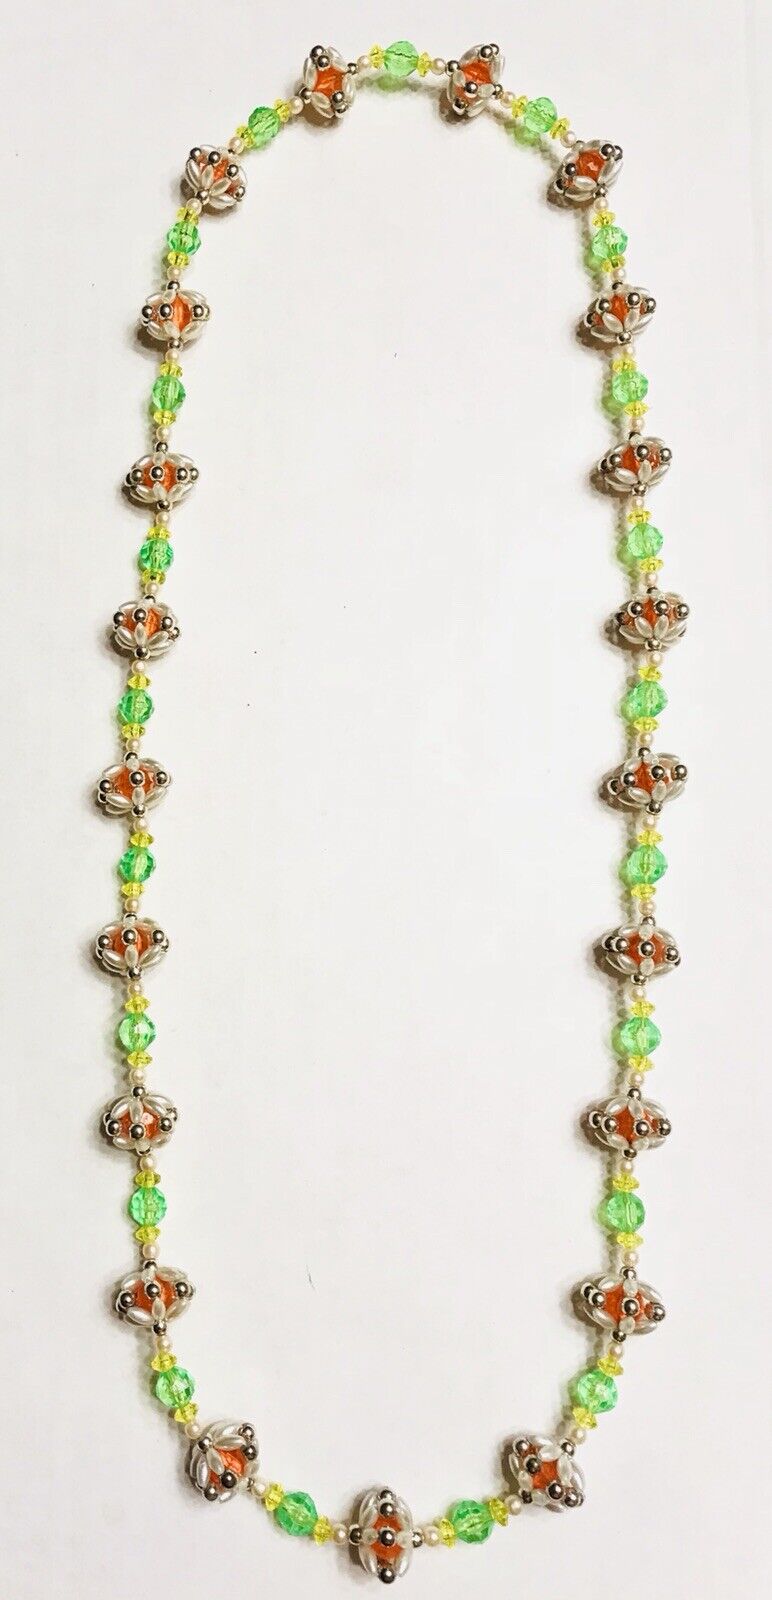 Vintage Beaded Necklace Faux Pearl NEW before selling Yellow Whit Boston Mall Orange Green